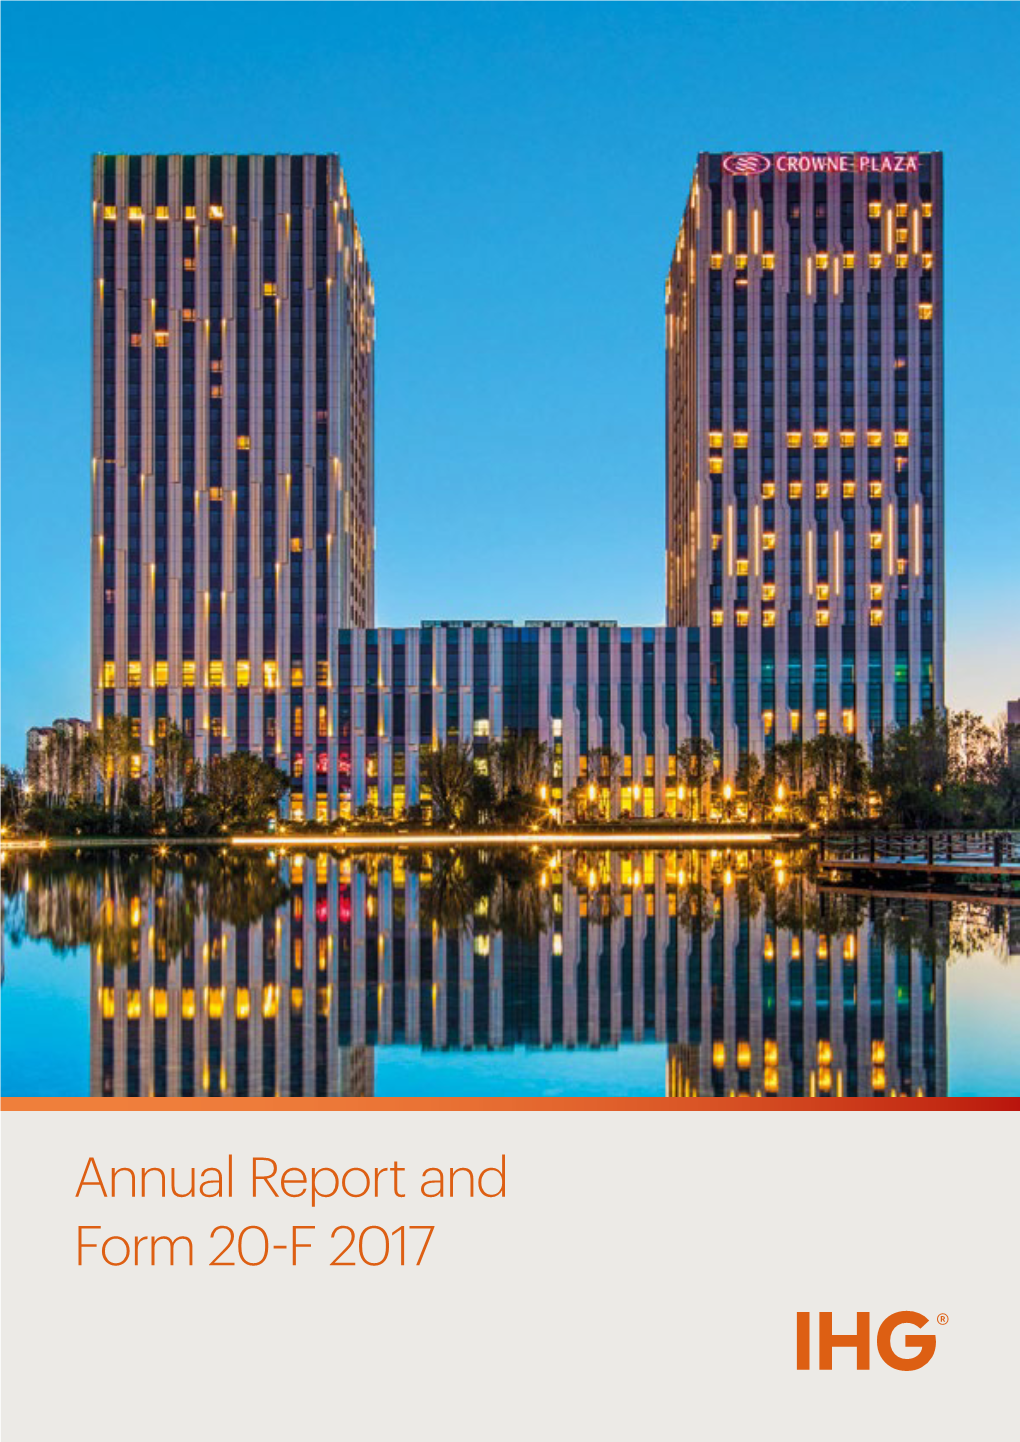 Annual Report and Form 20-F 2017